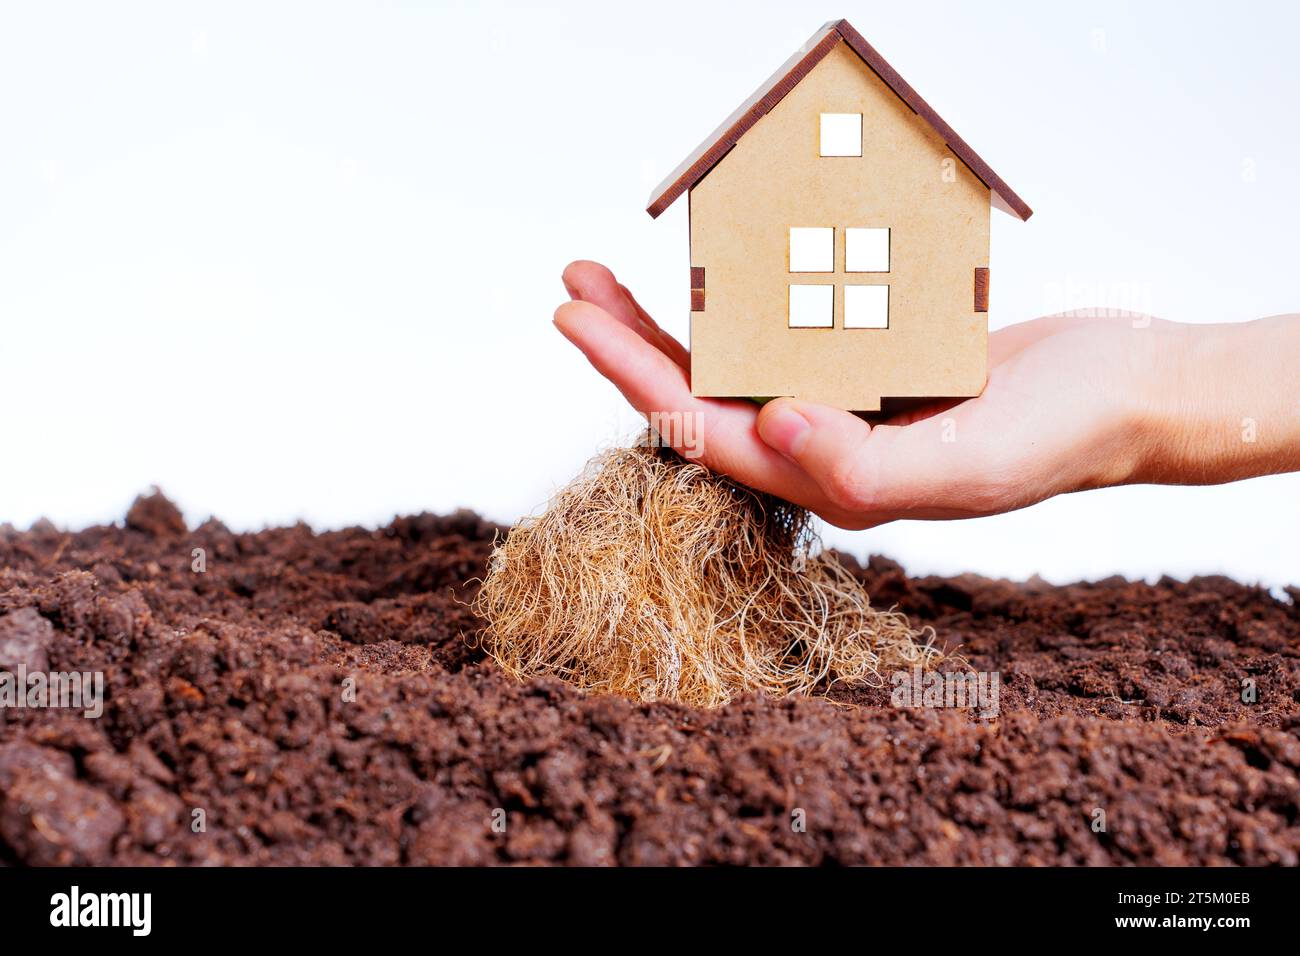 Hand gently lifts a tiny wooden house model with plant roots from the soil, symbolizing the start of a new home and fresh beginnings. Stock Photo